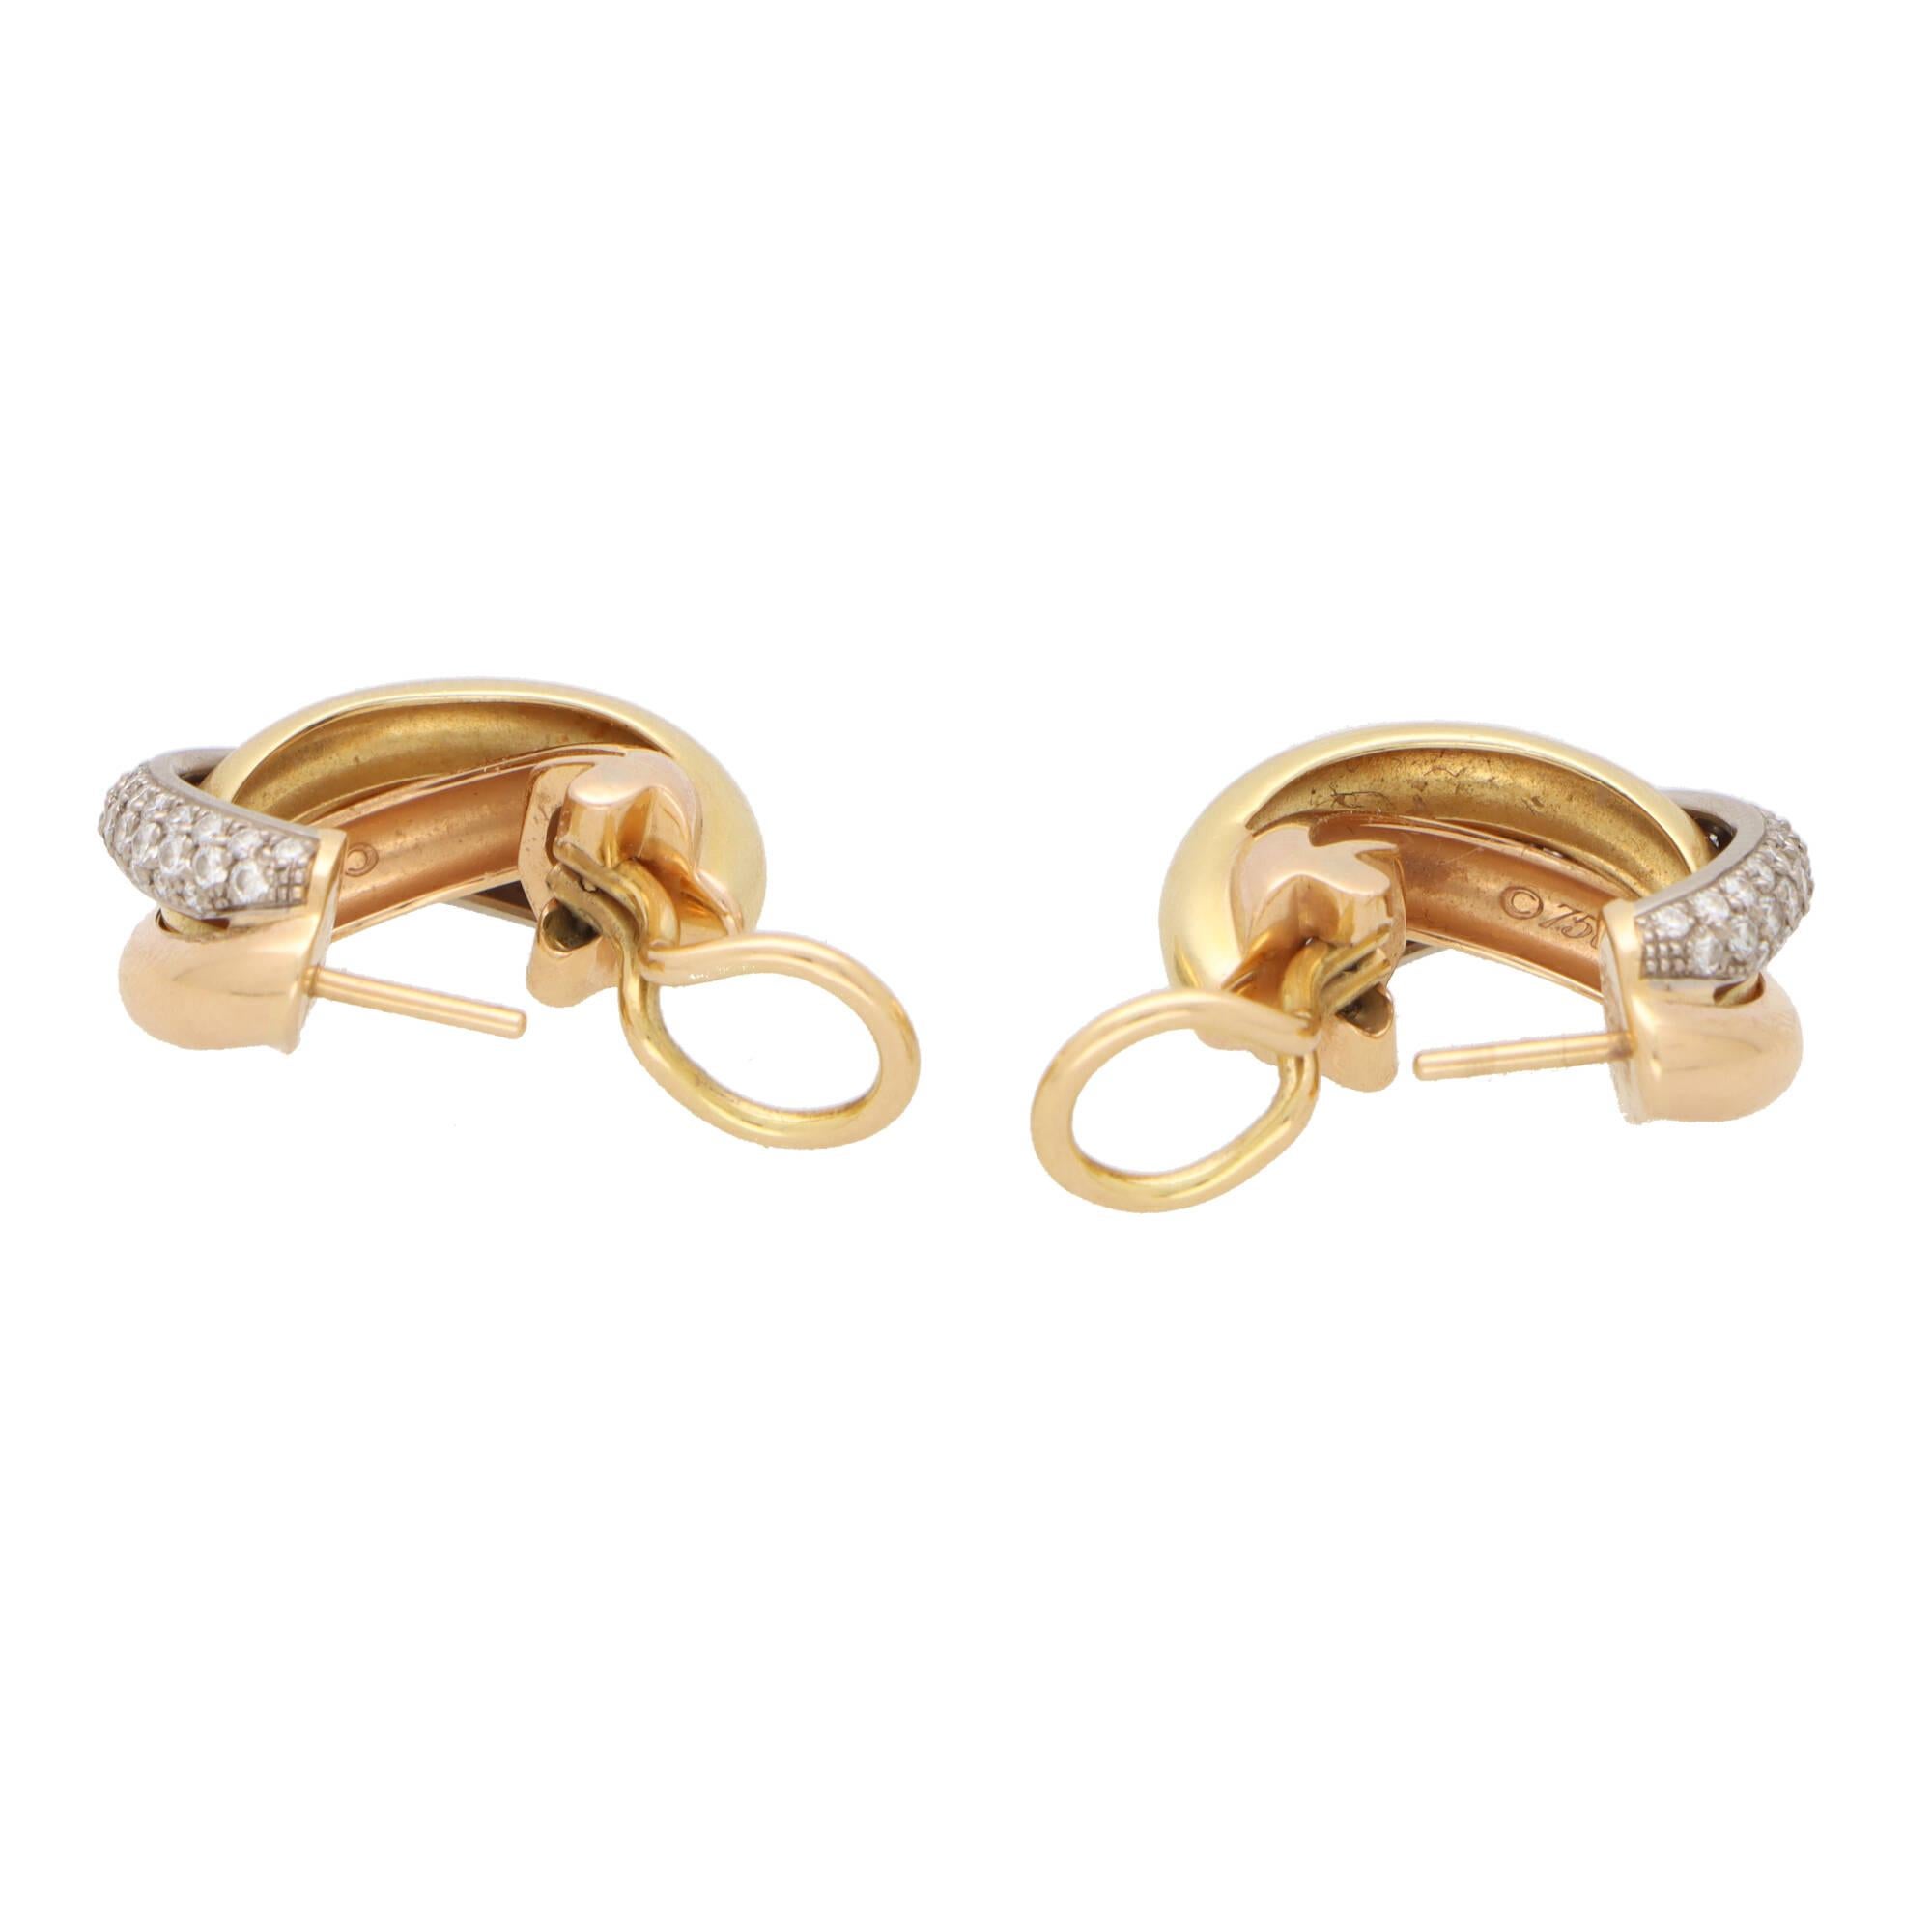 A classic pair of vintage Cartier diamond trinity hoop earrings set in 18k yellow, rose and white gold.

Each hoop is set in the iconic trinity design and is composed of three 3.5-millimetre bands which are soldered together to create the hoop. The